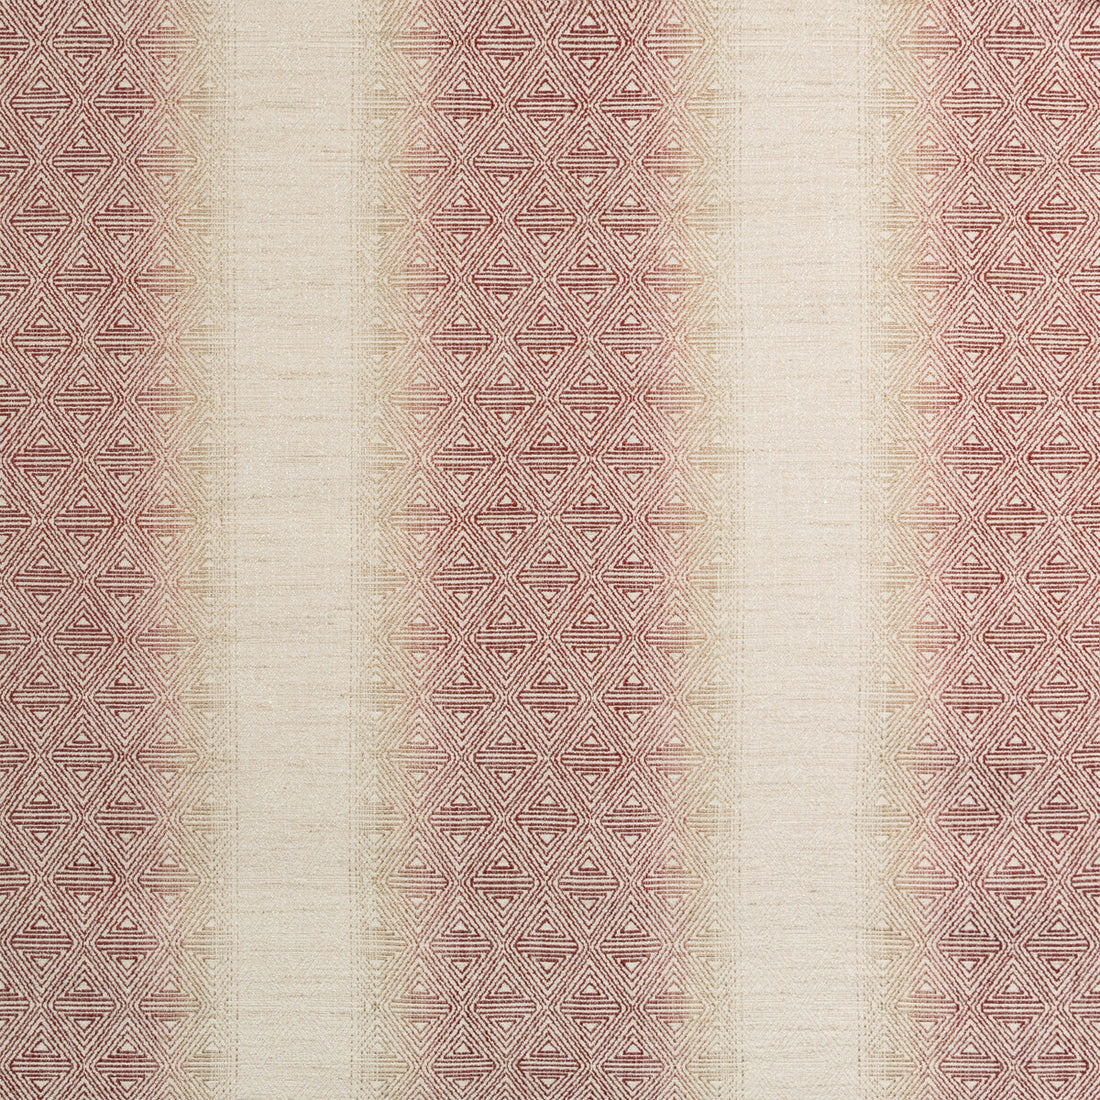 Tulum fabric in currant color - pattern 35556.9.0 - by Kravet Couture in the Modern Colors-Sojourn Collection collection